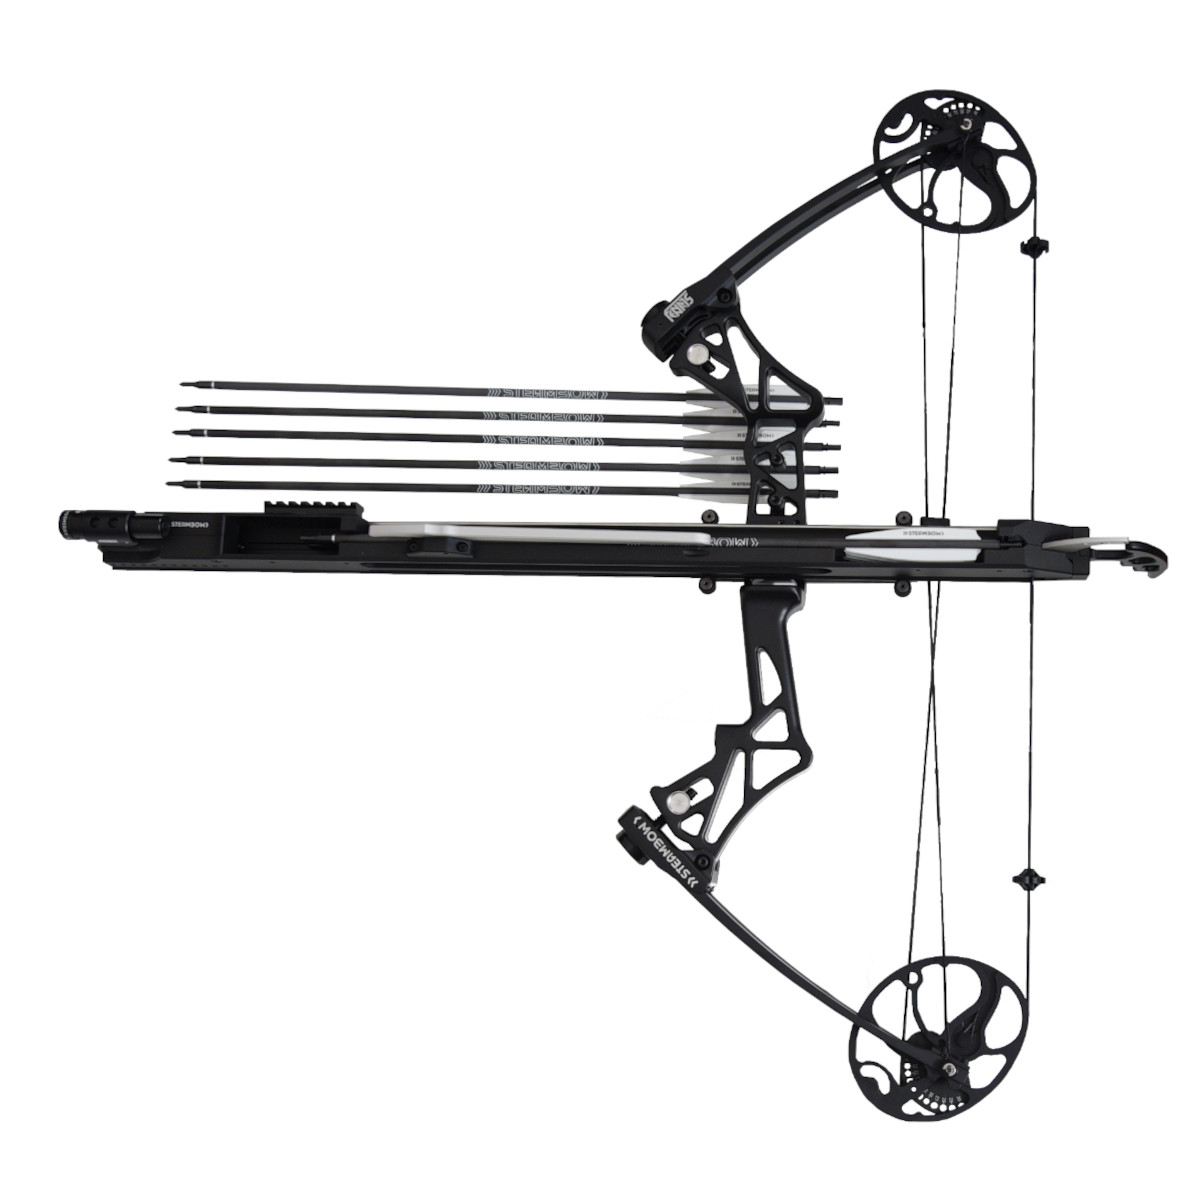 Steambow FENRIS – magazine with compound bow ”M1″ with laser sight